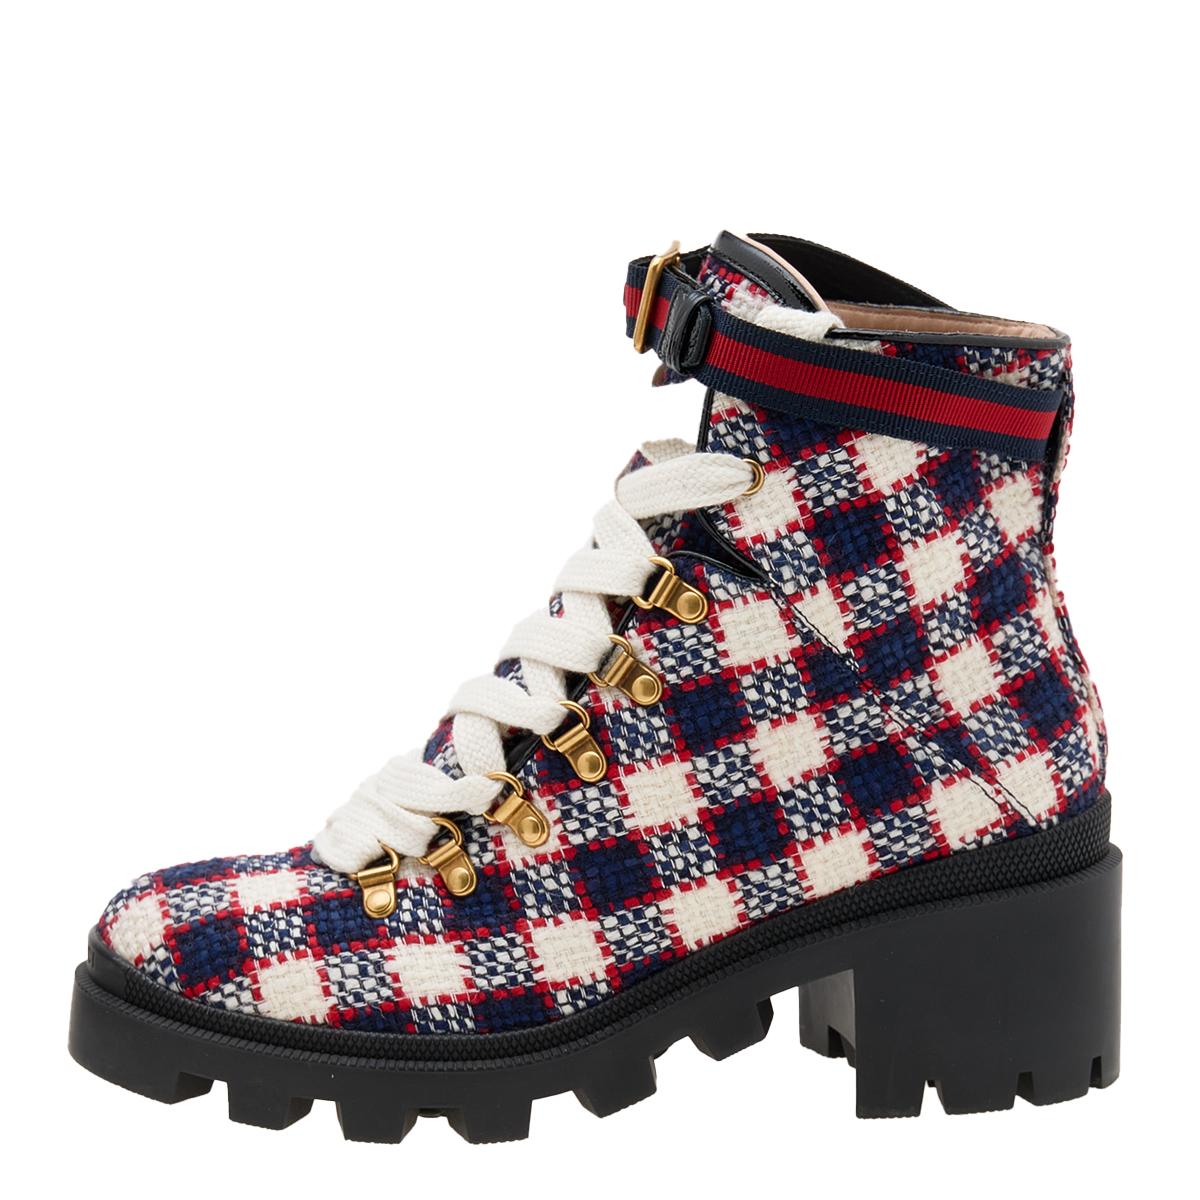 These Combat boots from the House of Gucci define style and sophistication with their trendy and sturdy structure. Made from Vintage Check tweed, their silhouette is enhanced with rubber soles, lace-ups, and 6 cm heels. They are fitted with